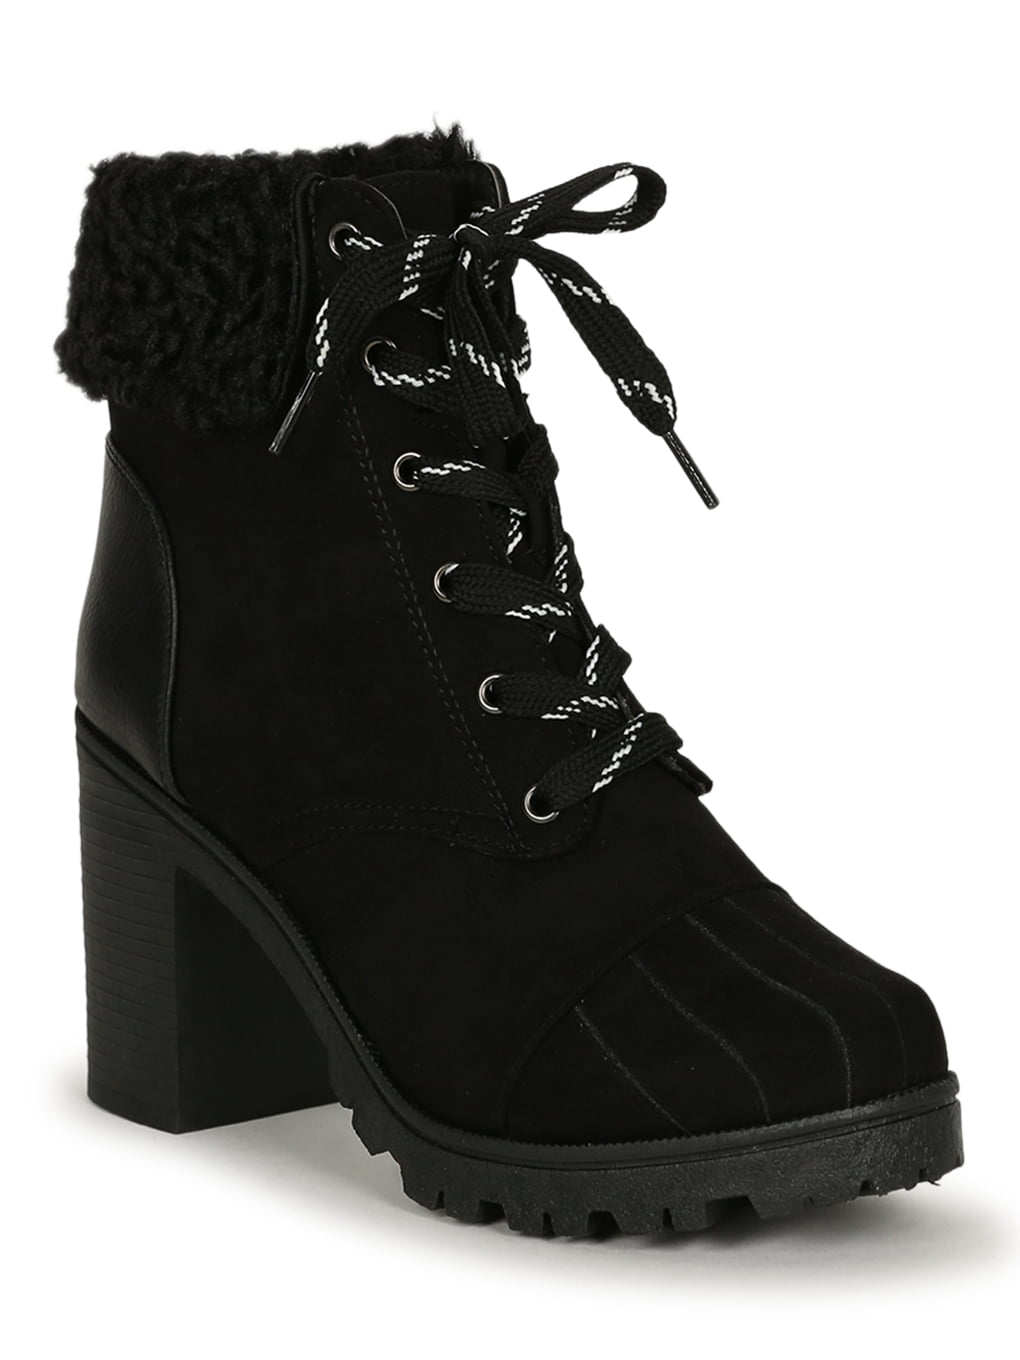 Women Sherpa Cuffed Lace up Lug Stacked Ankle Boot 19579 - Walmart.com